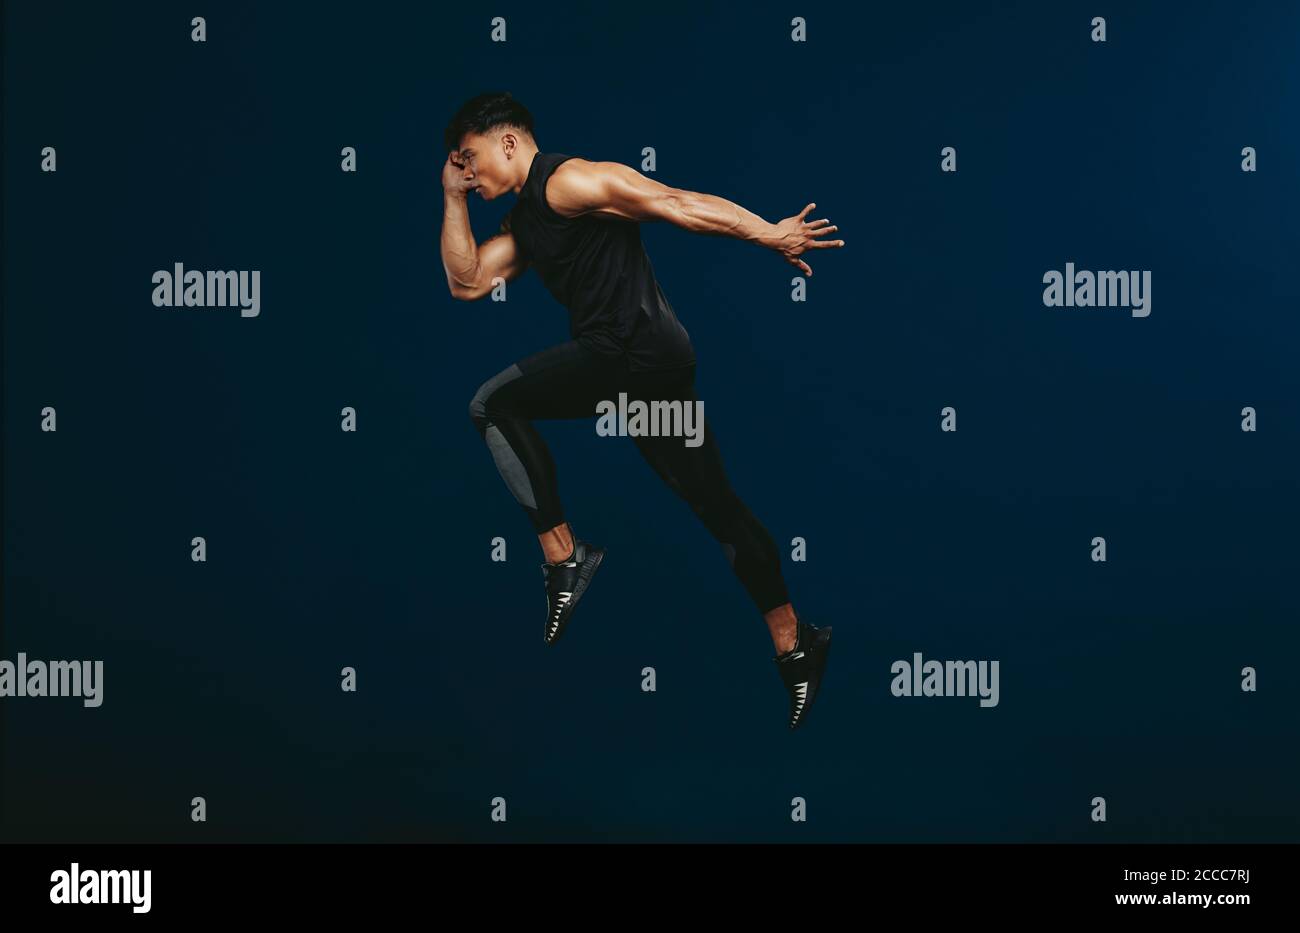 Sports man doing jumping and stretching workout. Full length of healthy fitness man doing exercise over dark background. Stock Photo